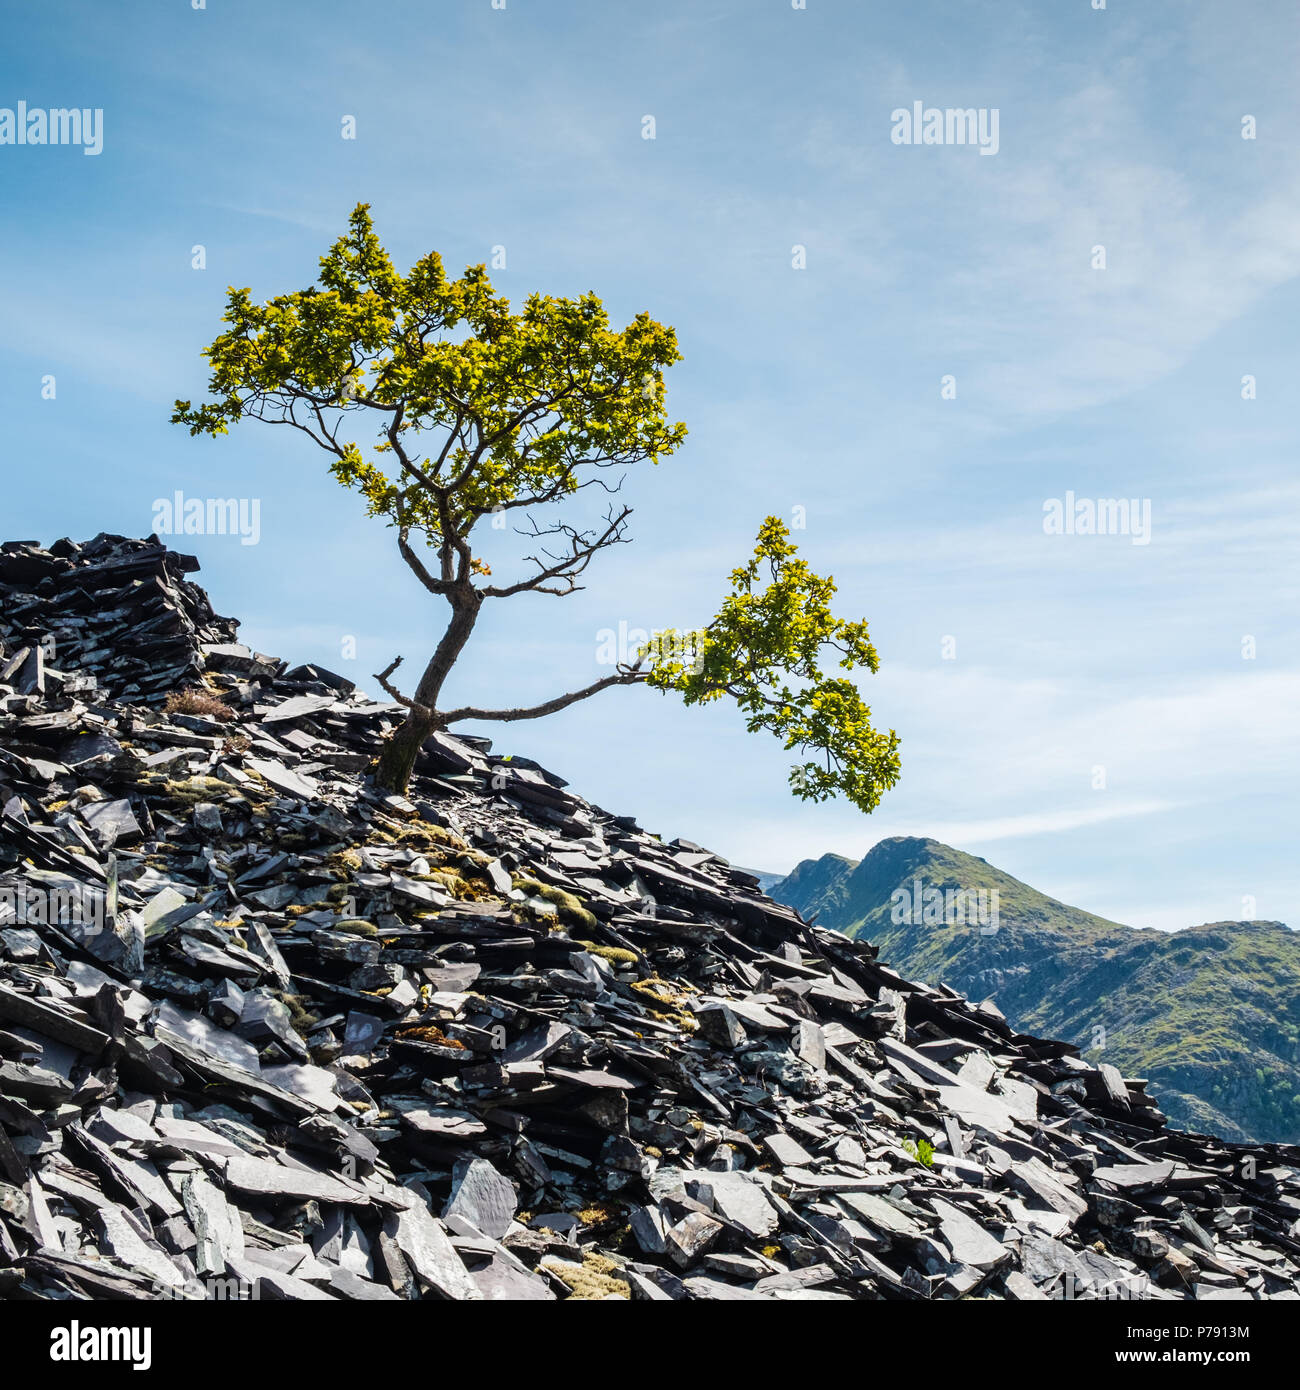 Isolated tree standing on a slope in an abandoned slate quarry at Dinorwic, Llanberis, with a backdrop of the Snowdonia mountain range and blue sky Stock Photo